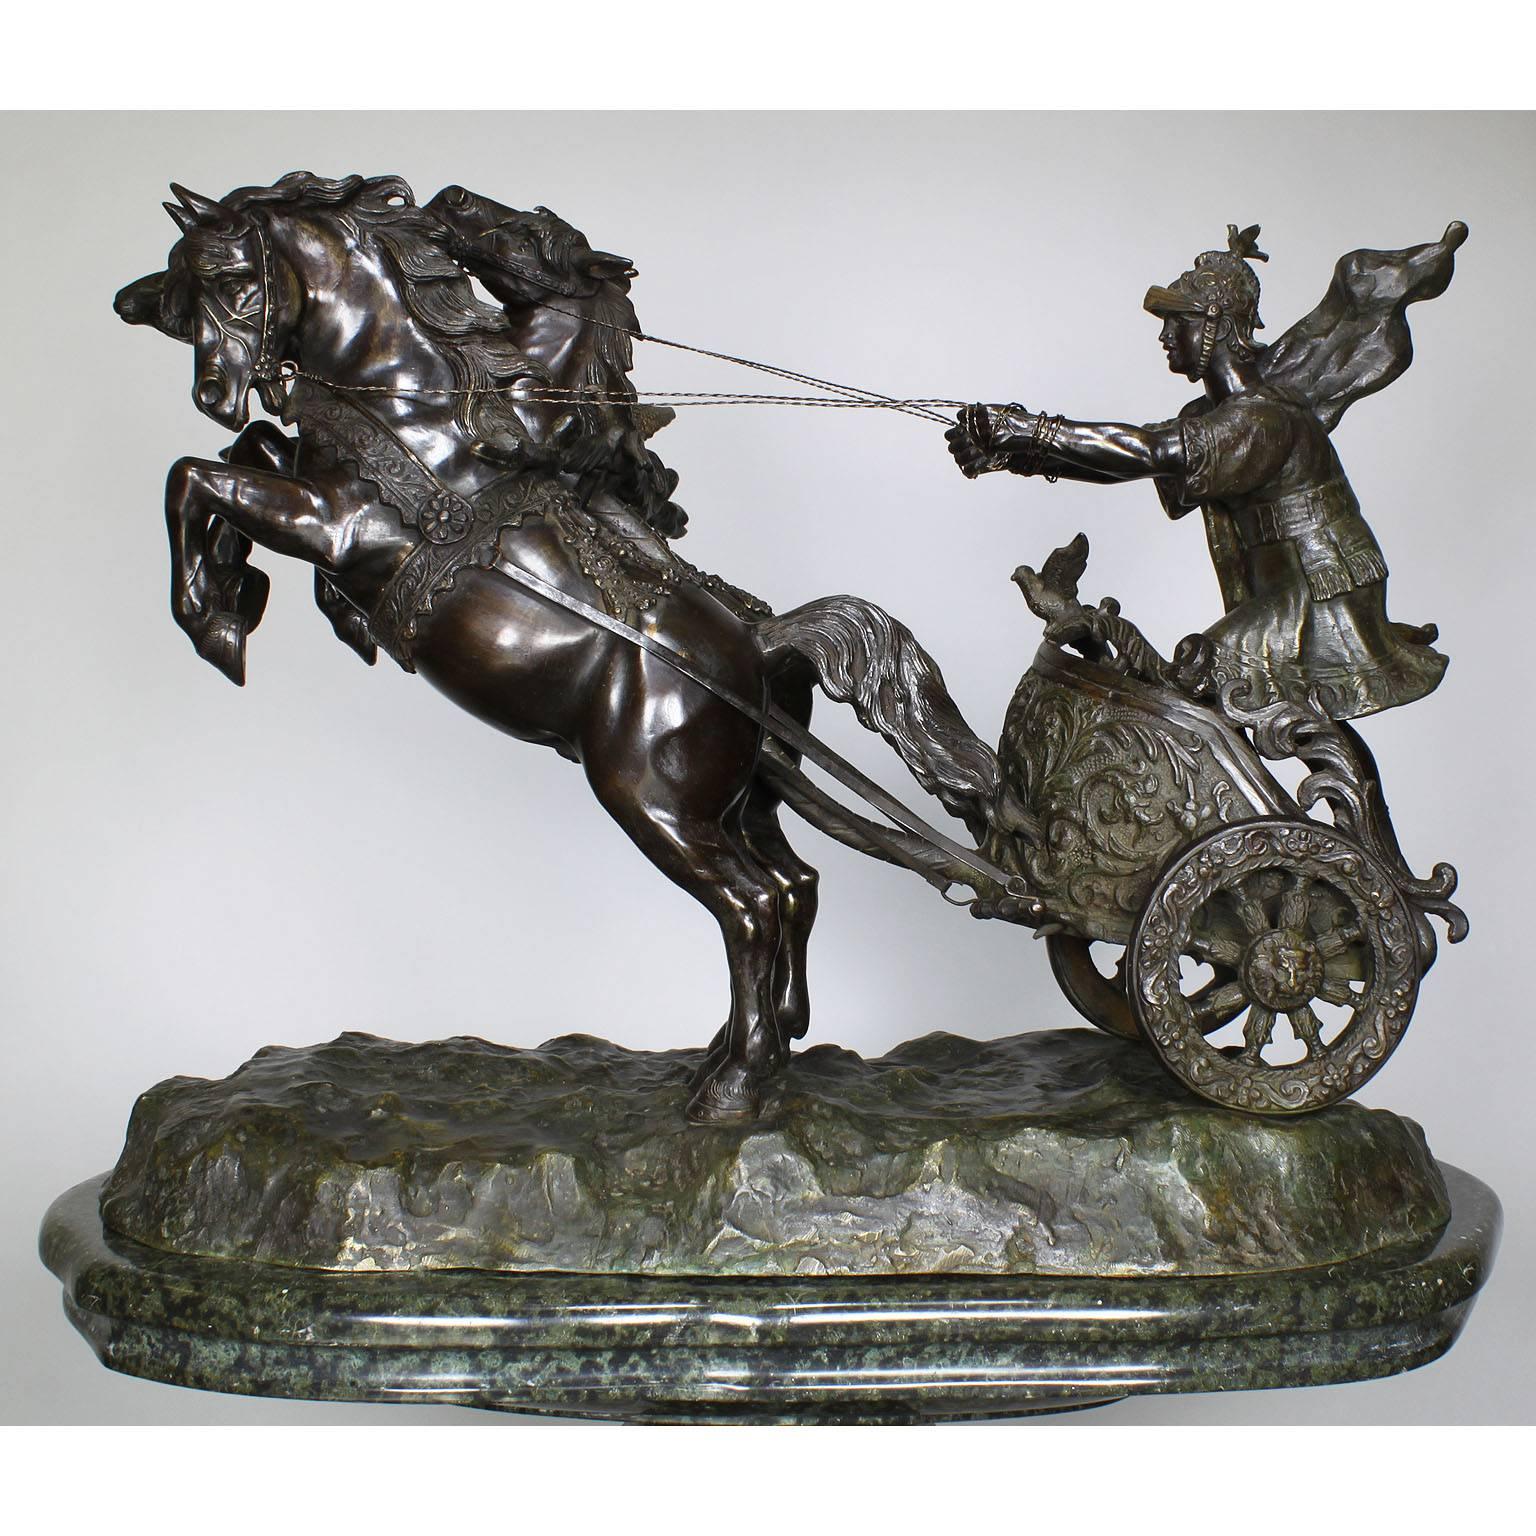 A fine and large Italian 19th century Greco Roman style brown patinated bronze sculpture group of a two-horse Roman Chariot and rider in a dark patina, raised on a fitted Verde d'alp marble pedestal. Unsigned, Rome, circa 1880.

Measure: Overall